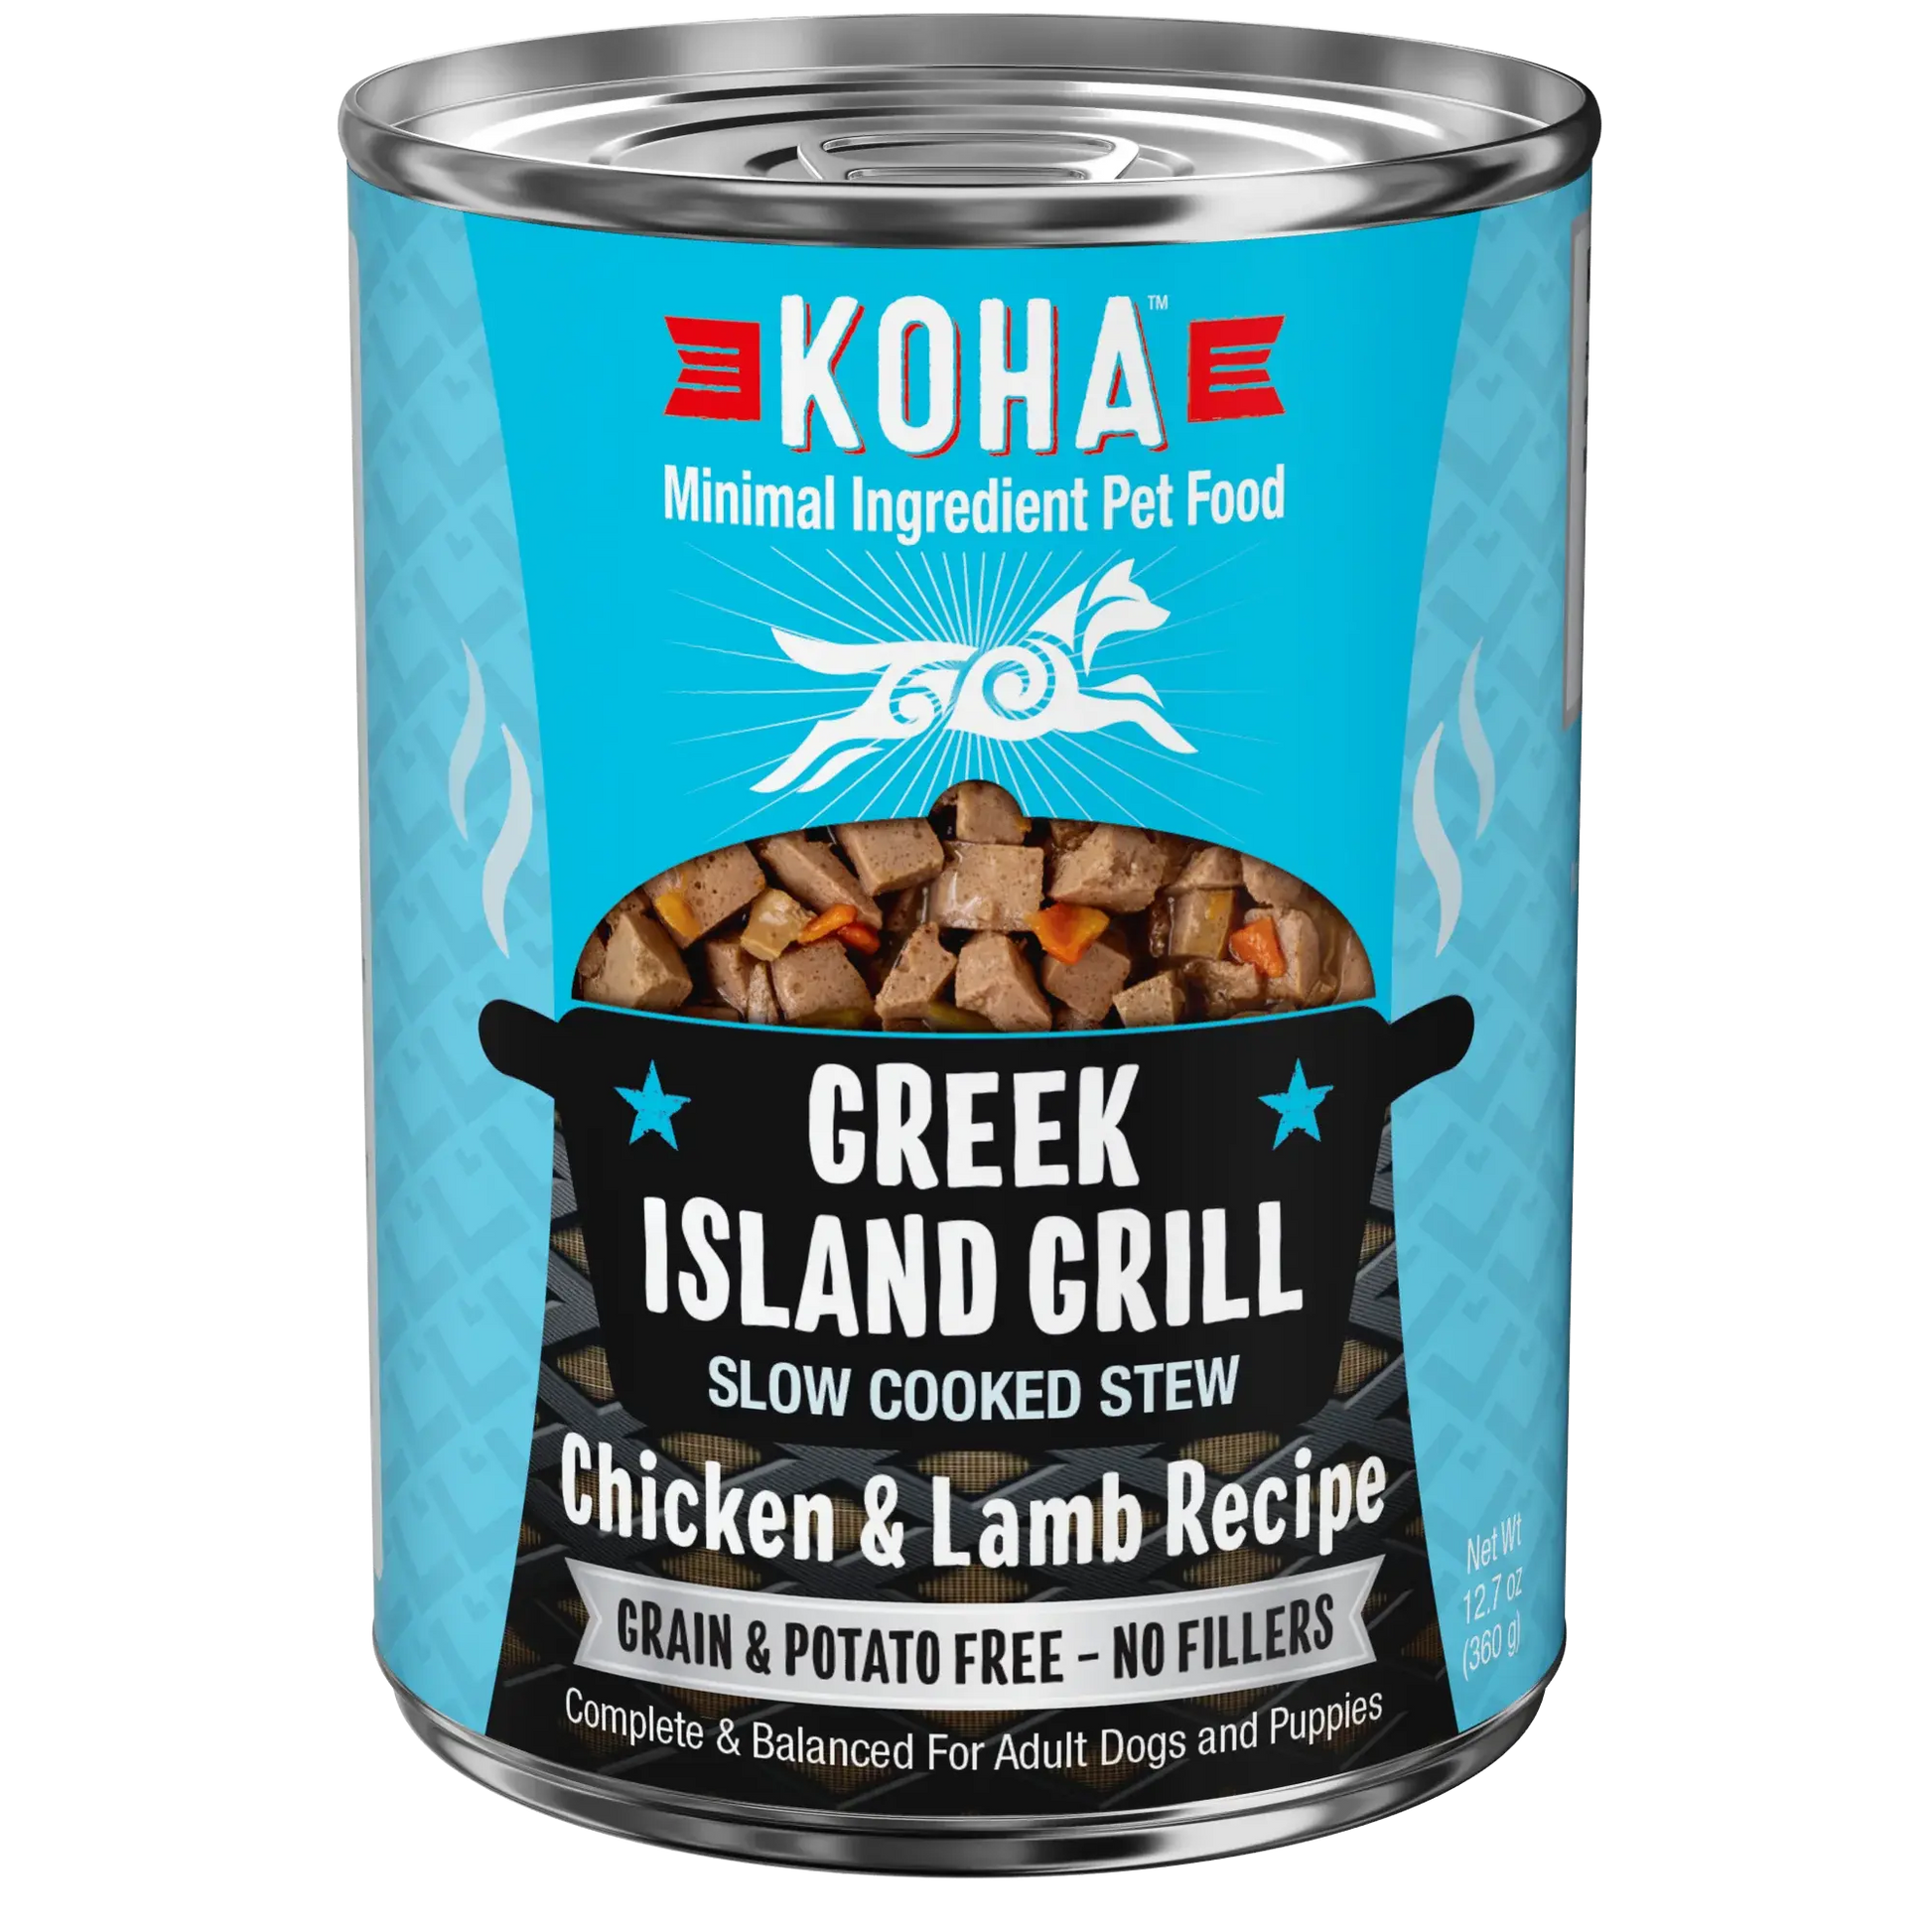 KOHA Greek Island Grill Slow Cooked Stew Chicken and Lamb for Dogs 12.7oz Case of 12 KOHA